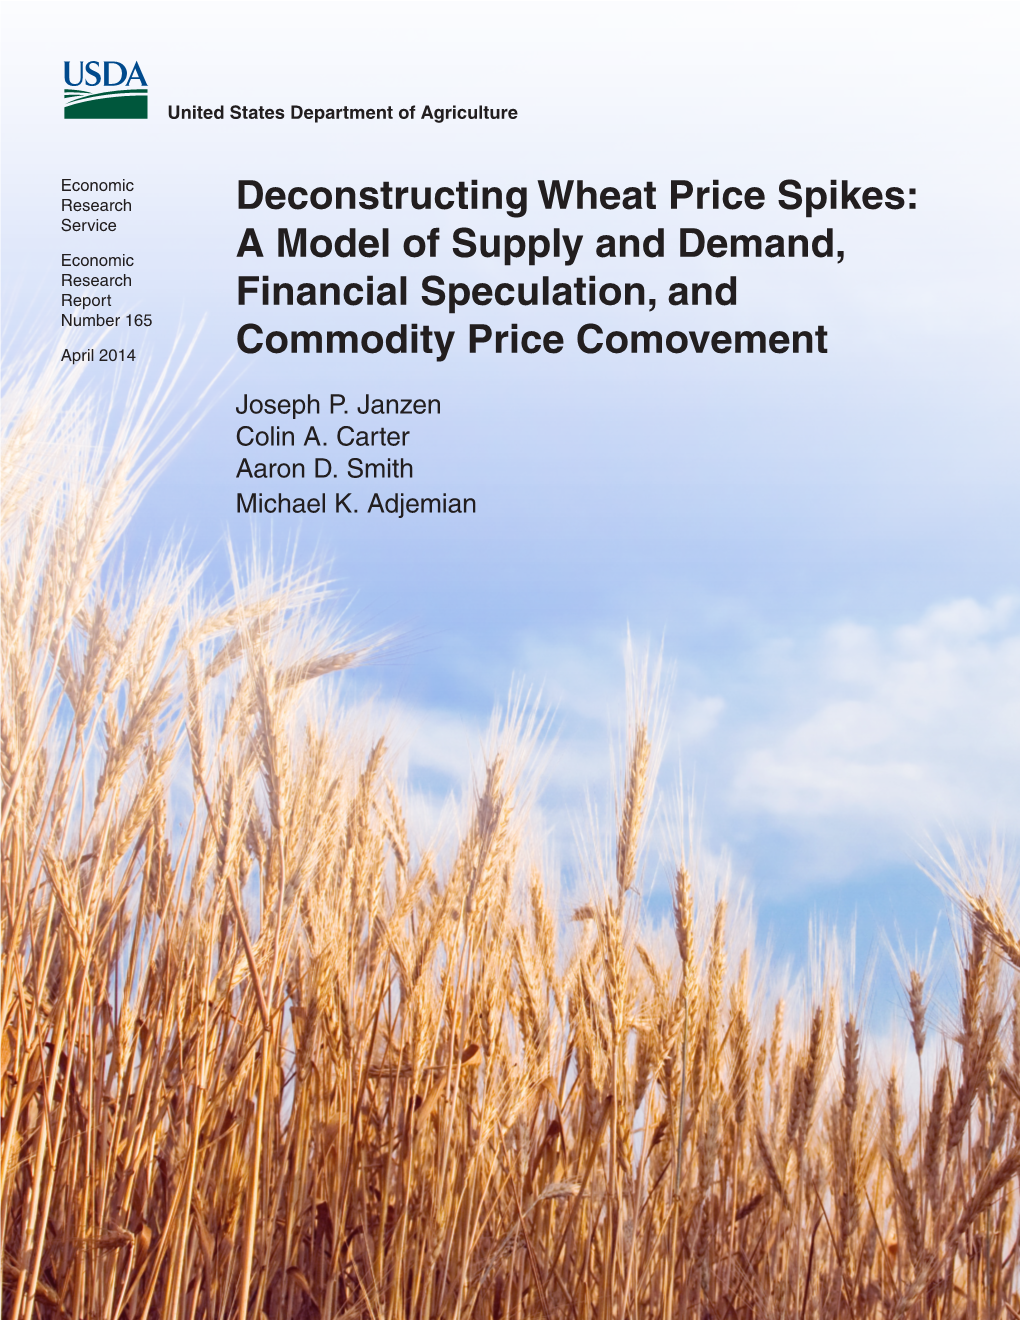 Deconstructing Wheat Price Spikes: a Model of Supply and Demand, Financial Speculation, and Commodity Price Comovement, ERR-165, U.S